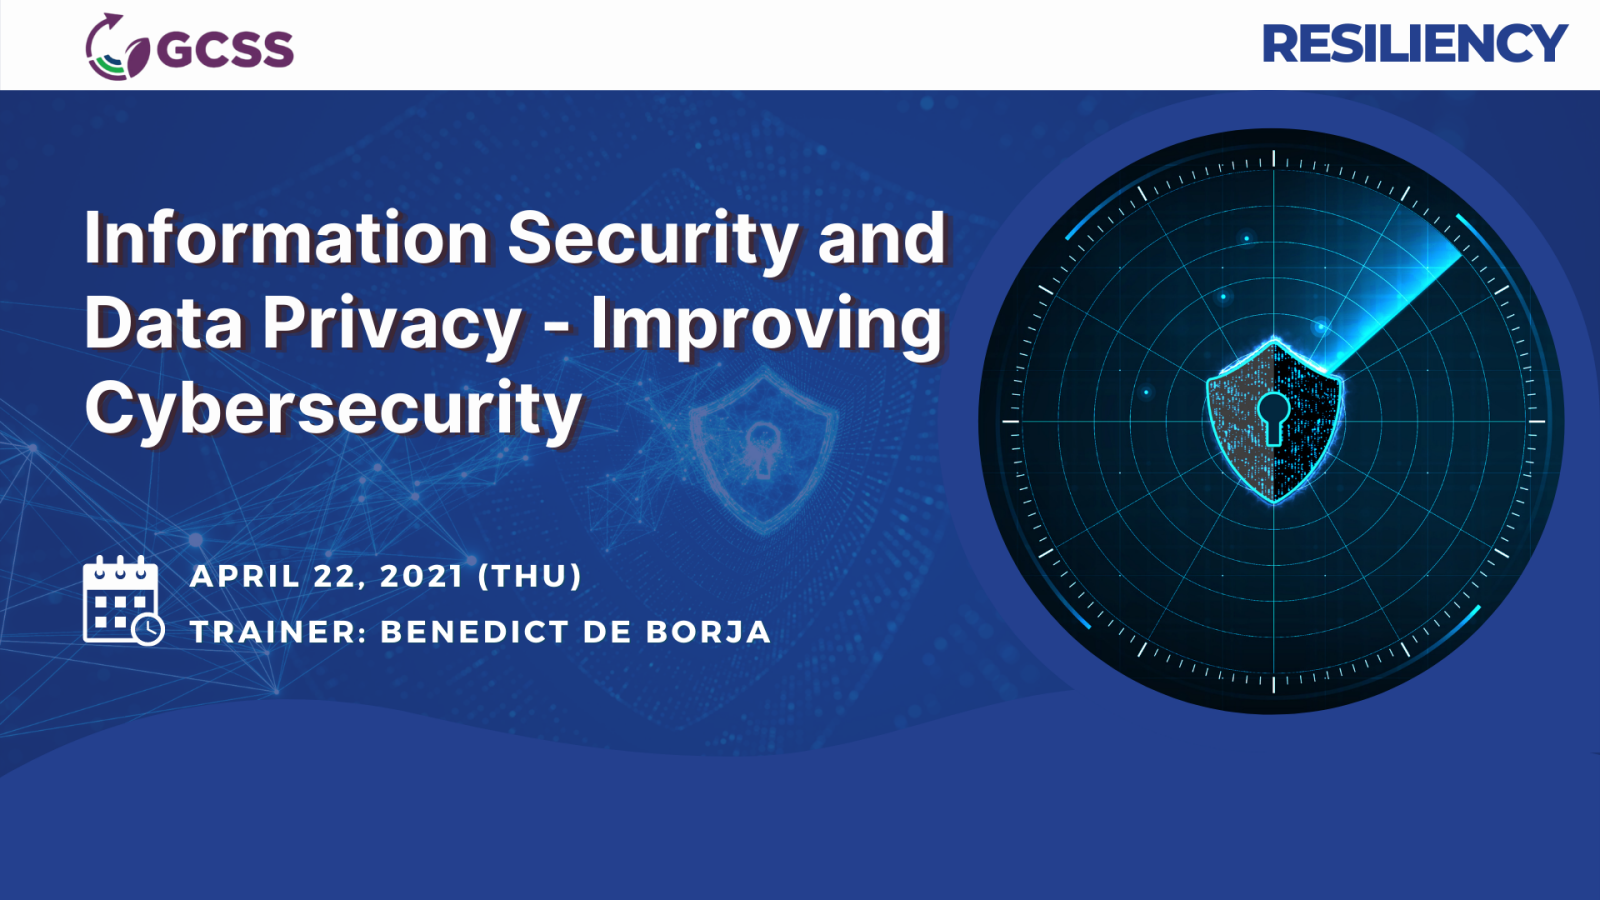 Information Security and Data Privacy - Improving Cybersecurity, Manila, National Capital Region, Philippines